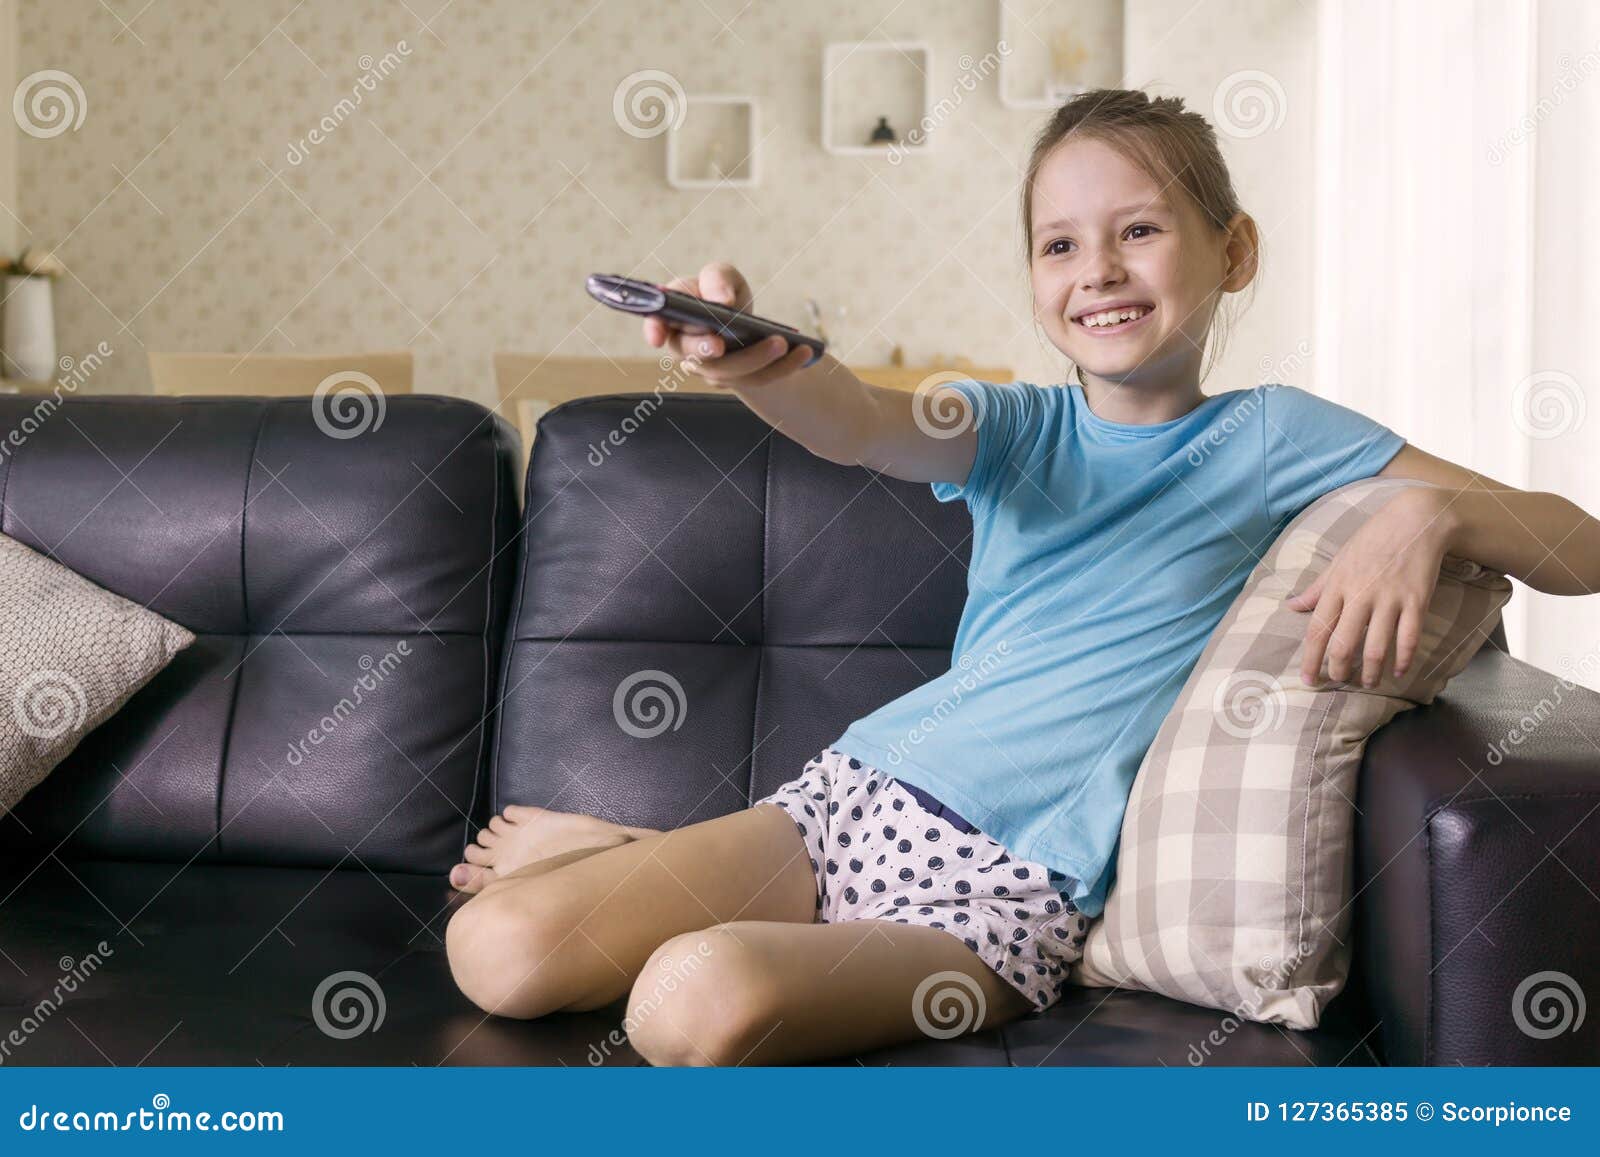 Cute Preteen Girl Watching TV On Couch Using Remote Control Living